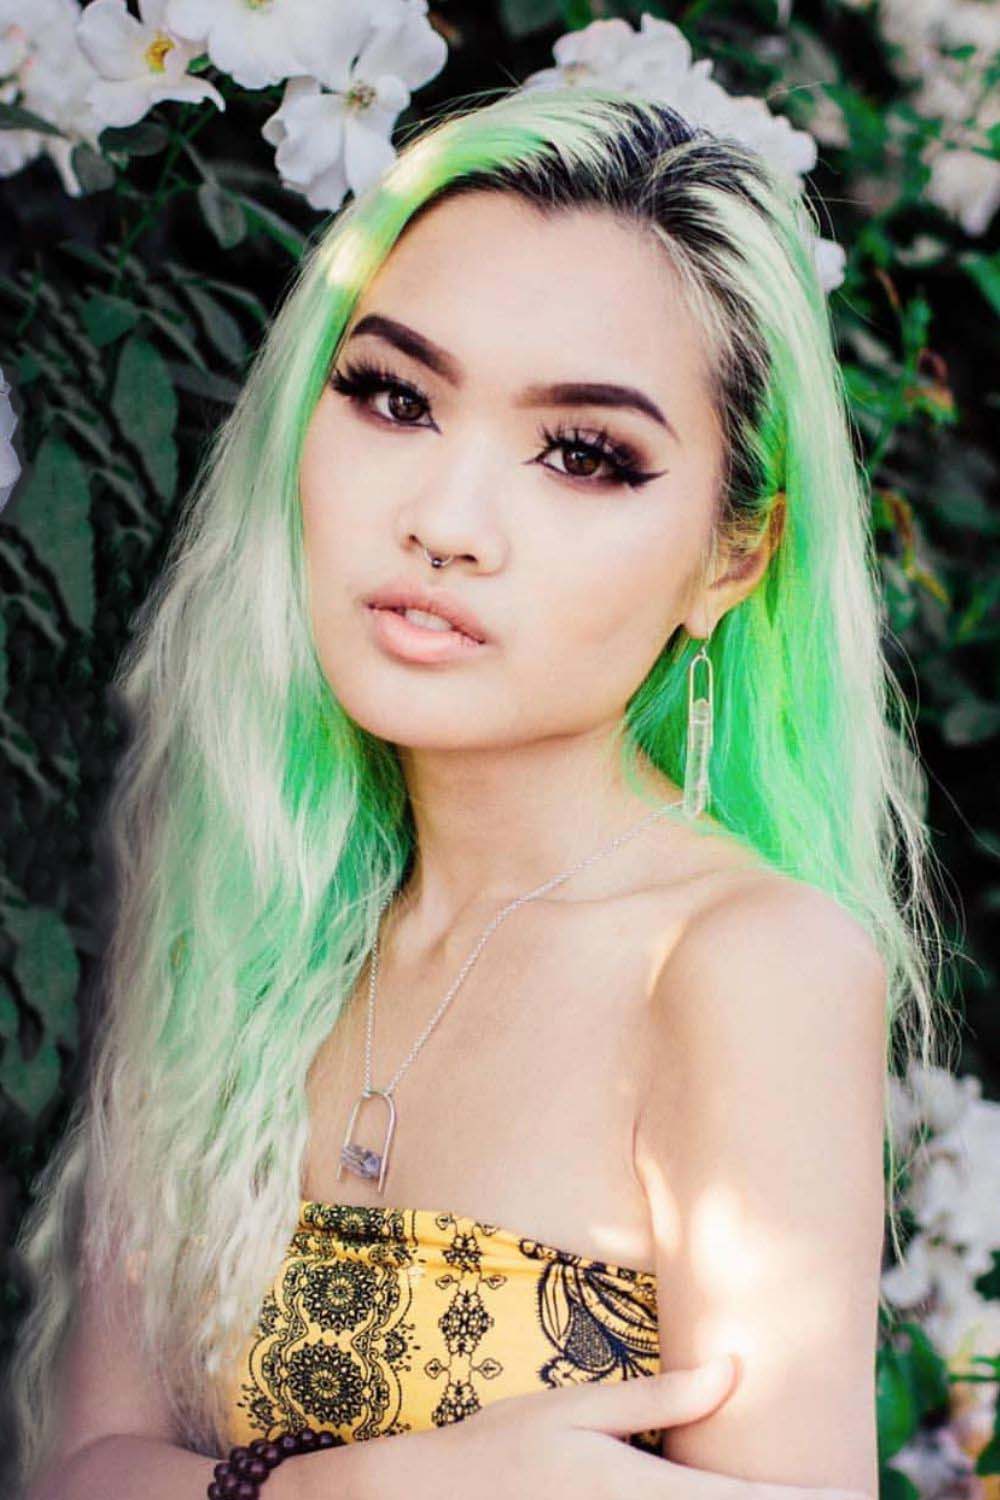 30 Sexy Green Hair Ideas To Try - Love Hairstyles.